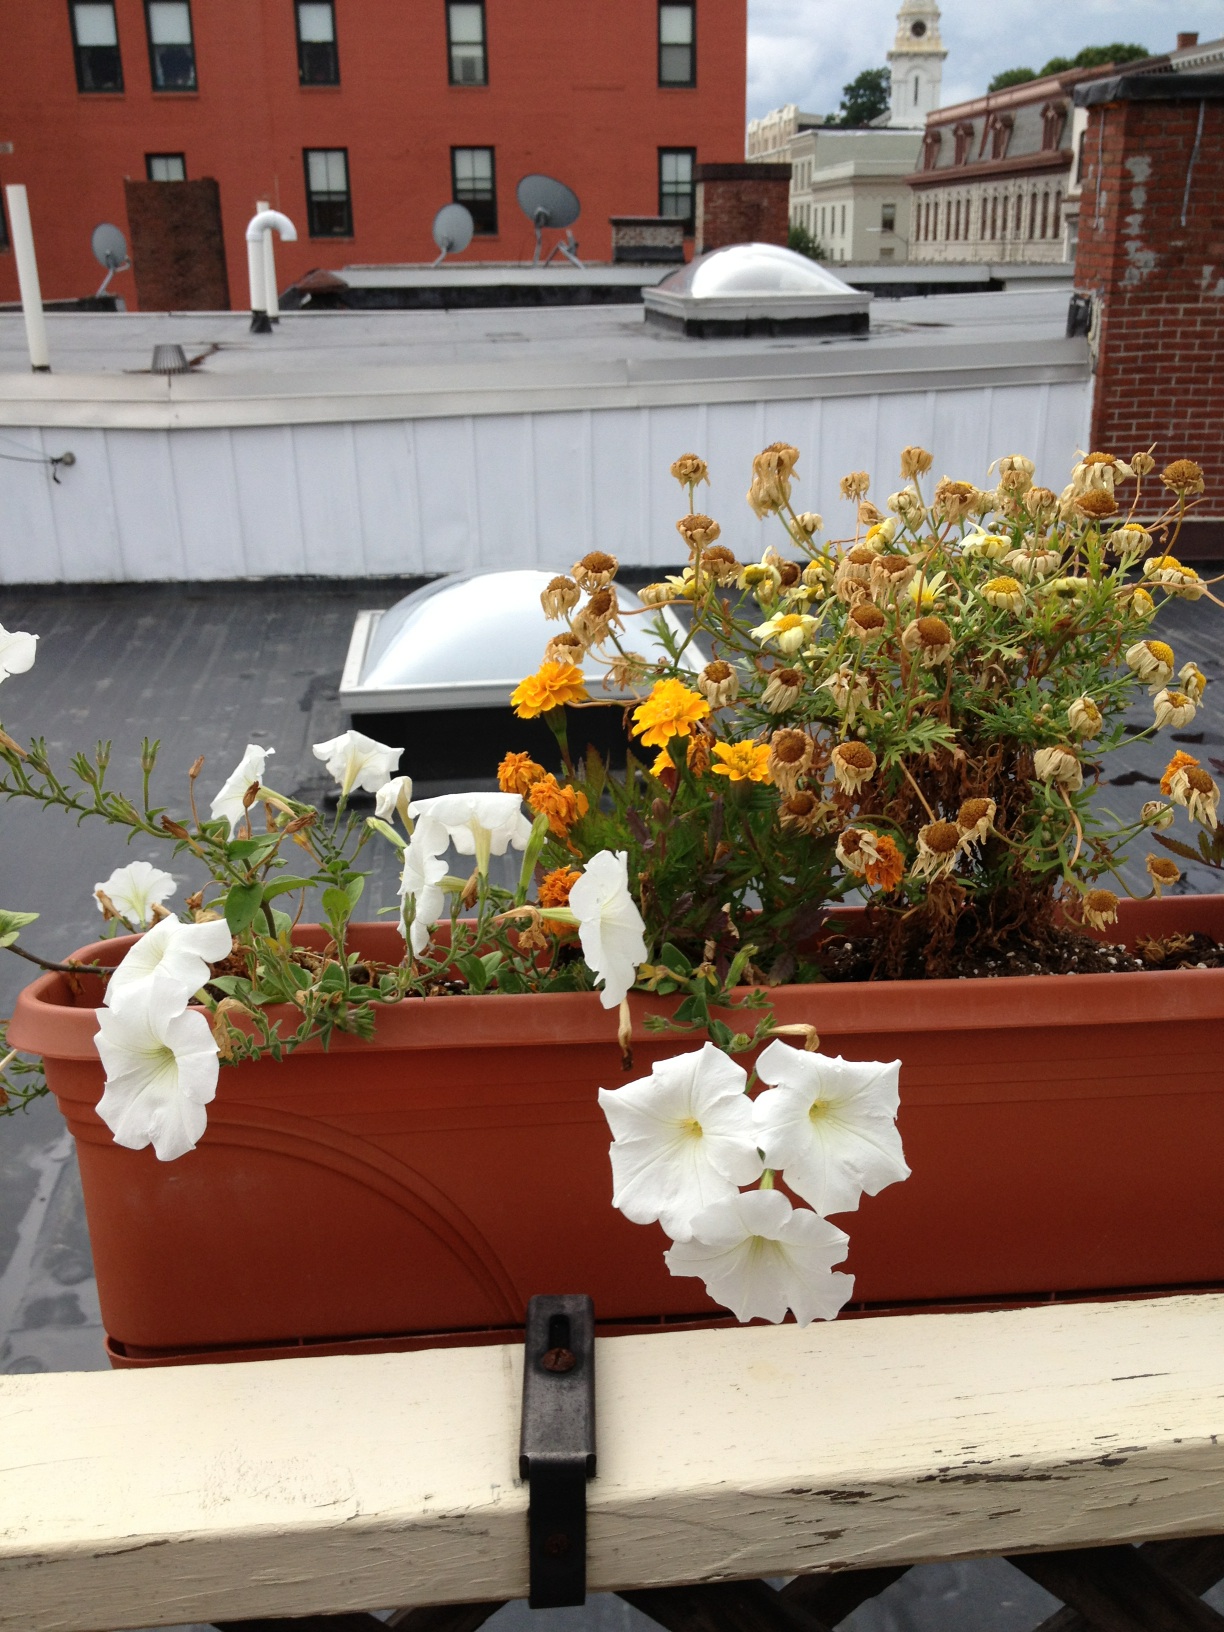 A brown window planter with white flowers and yellow flowers that have died.